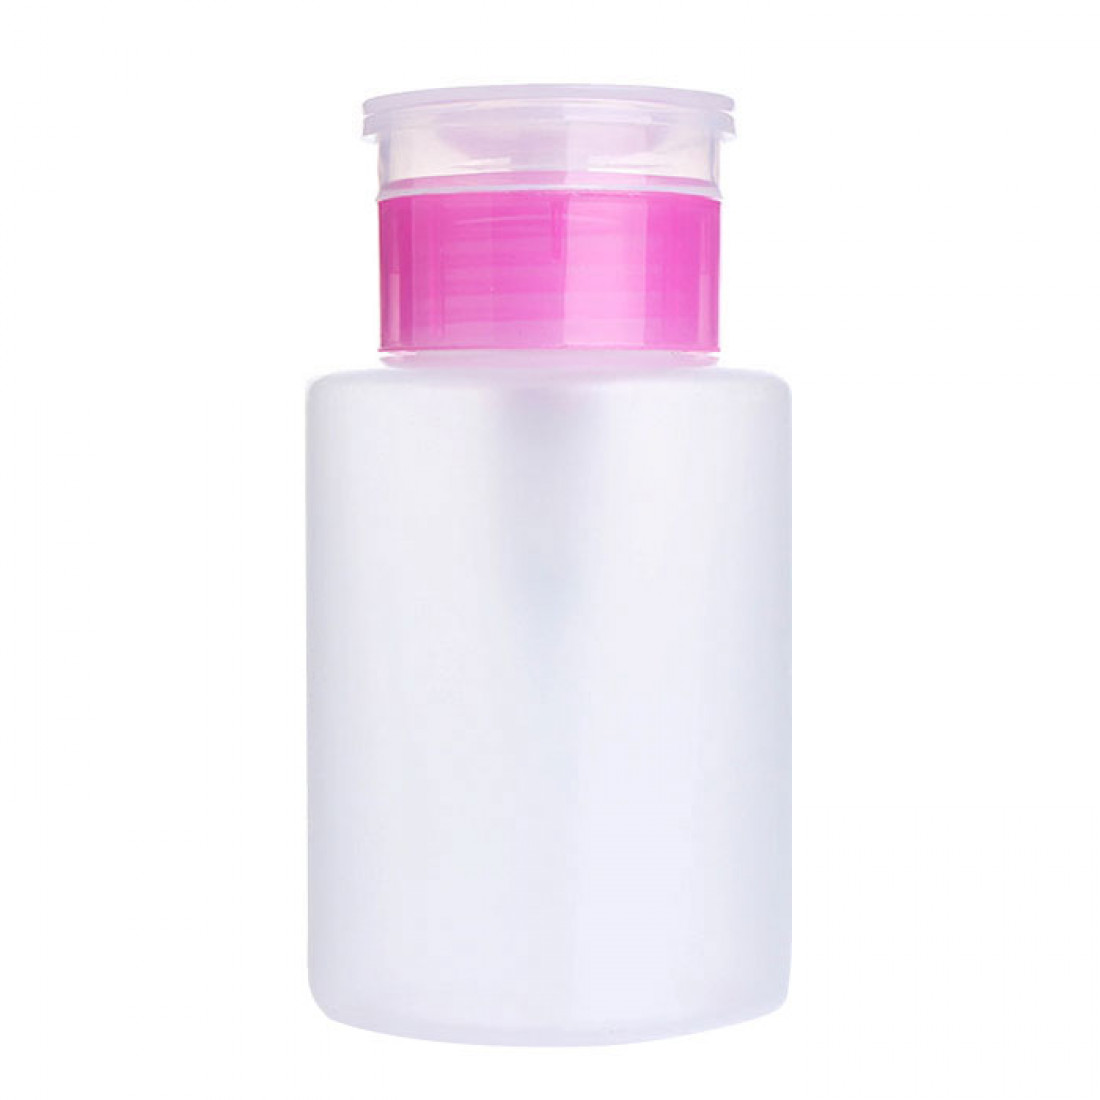 Liquid dispenser cup light pink 170ml - 3280064 OTHER CONSUMABLES-NAILS FORMS-TIPS-EDUCATIONAL MATERIAL